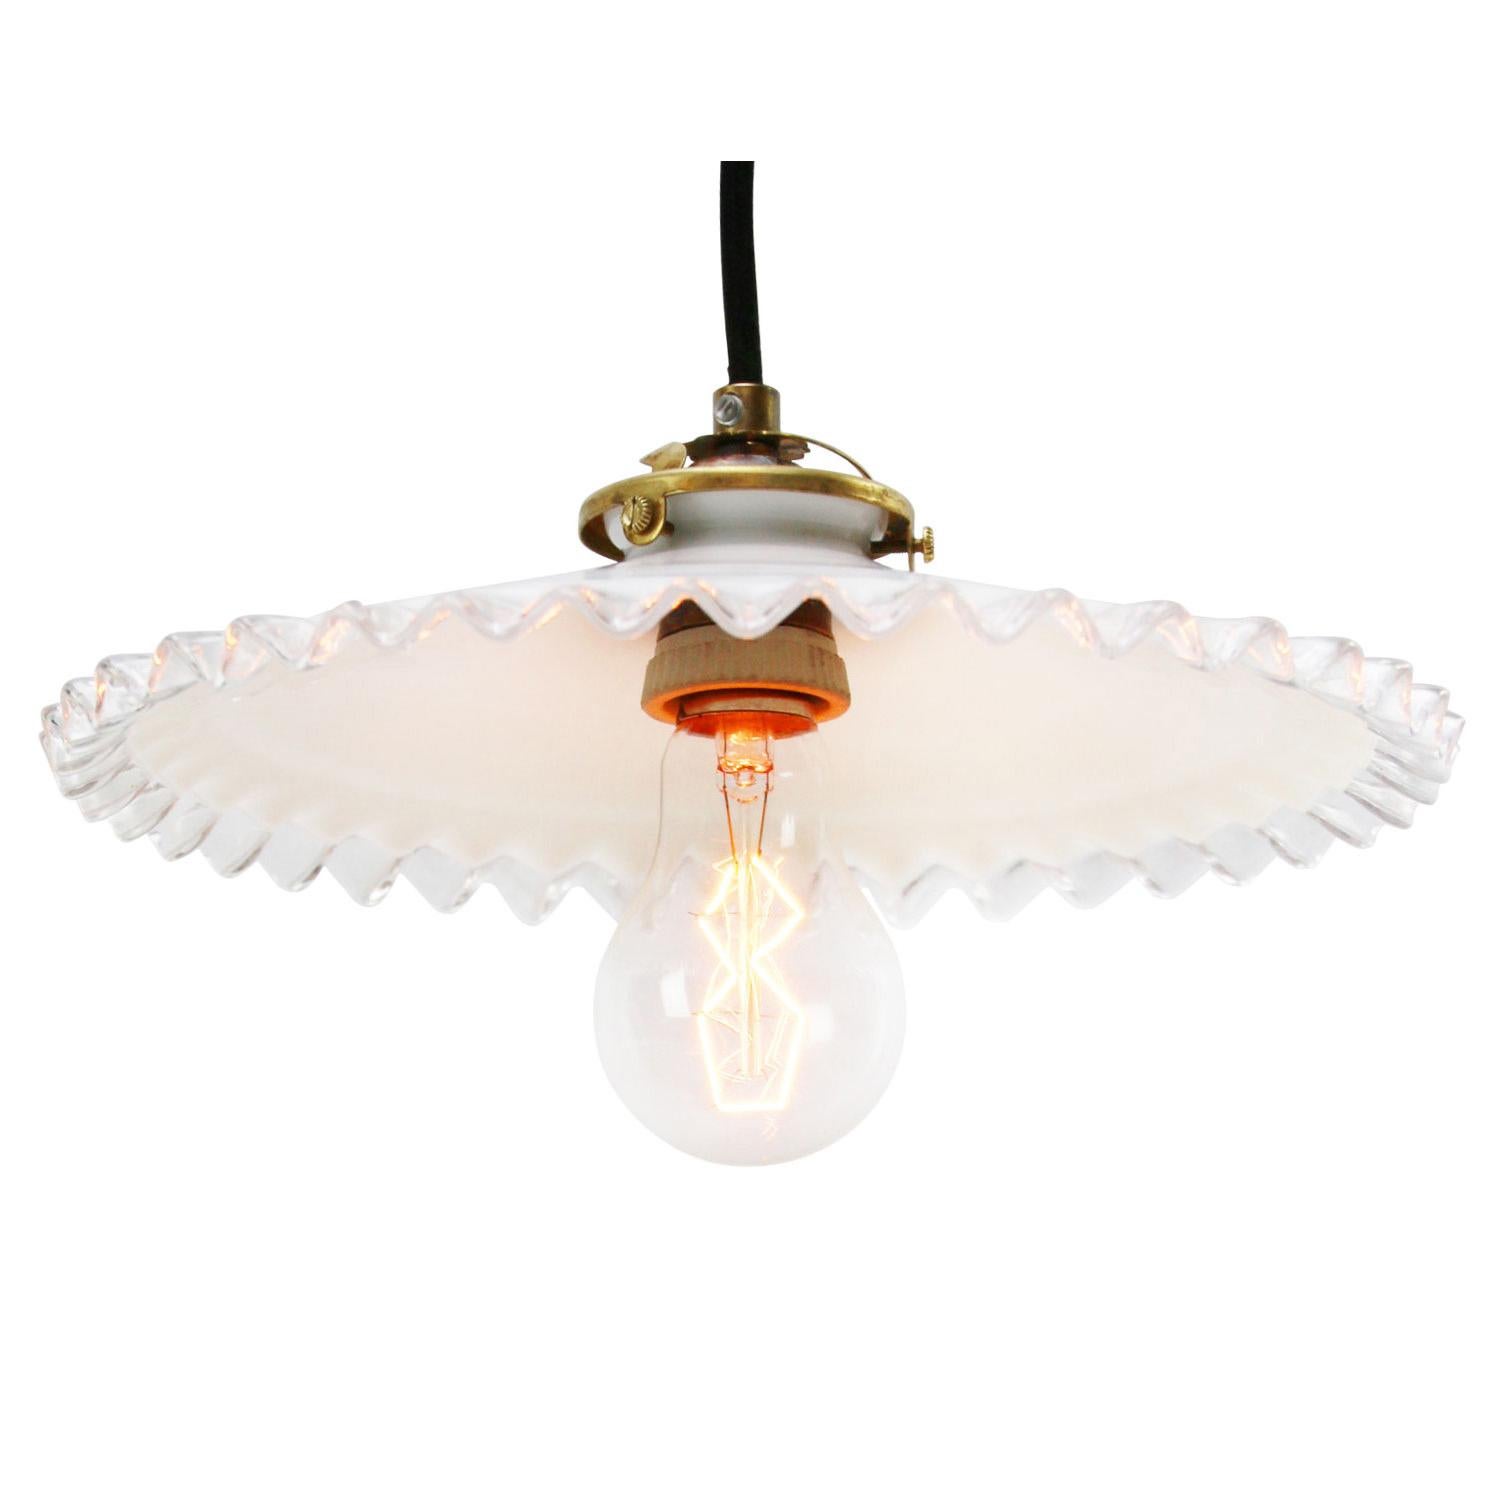 French opaline glass Industrial pendant. 

Weight 0.70 kg / 1.5 lb.

Priced per individual item. All lamps have been made suitable by international standards for incandescent light bulbs, energy-efficient and LED bulbs. E26/E27 bulb holders and new